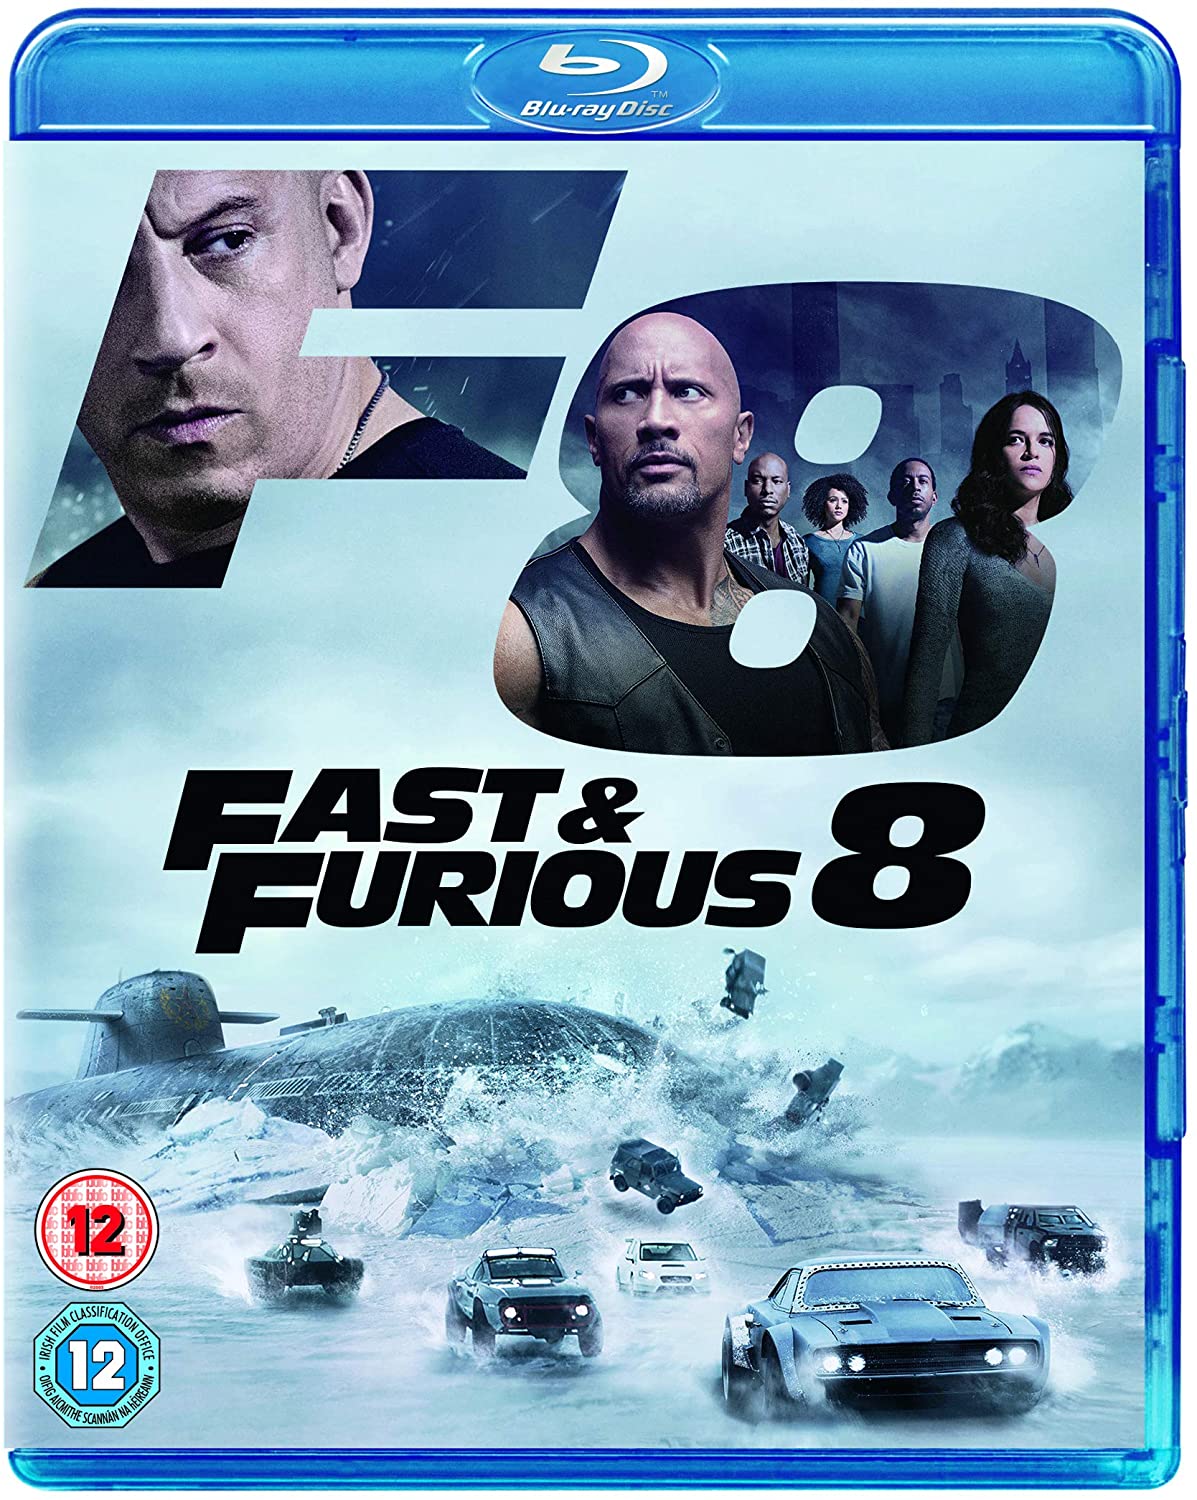 Fast And Furious 8 [2017] (Blu-ray)